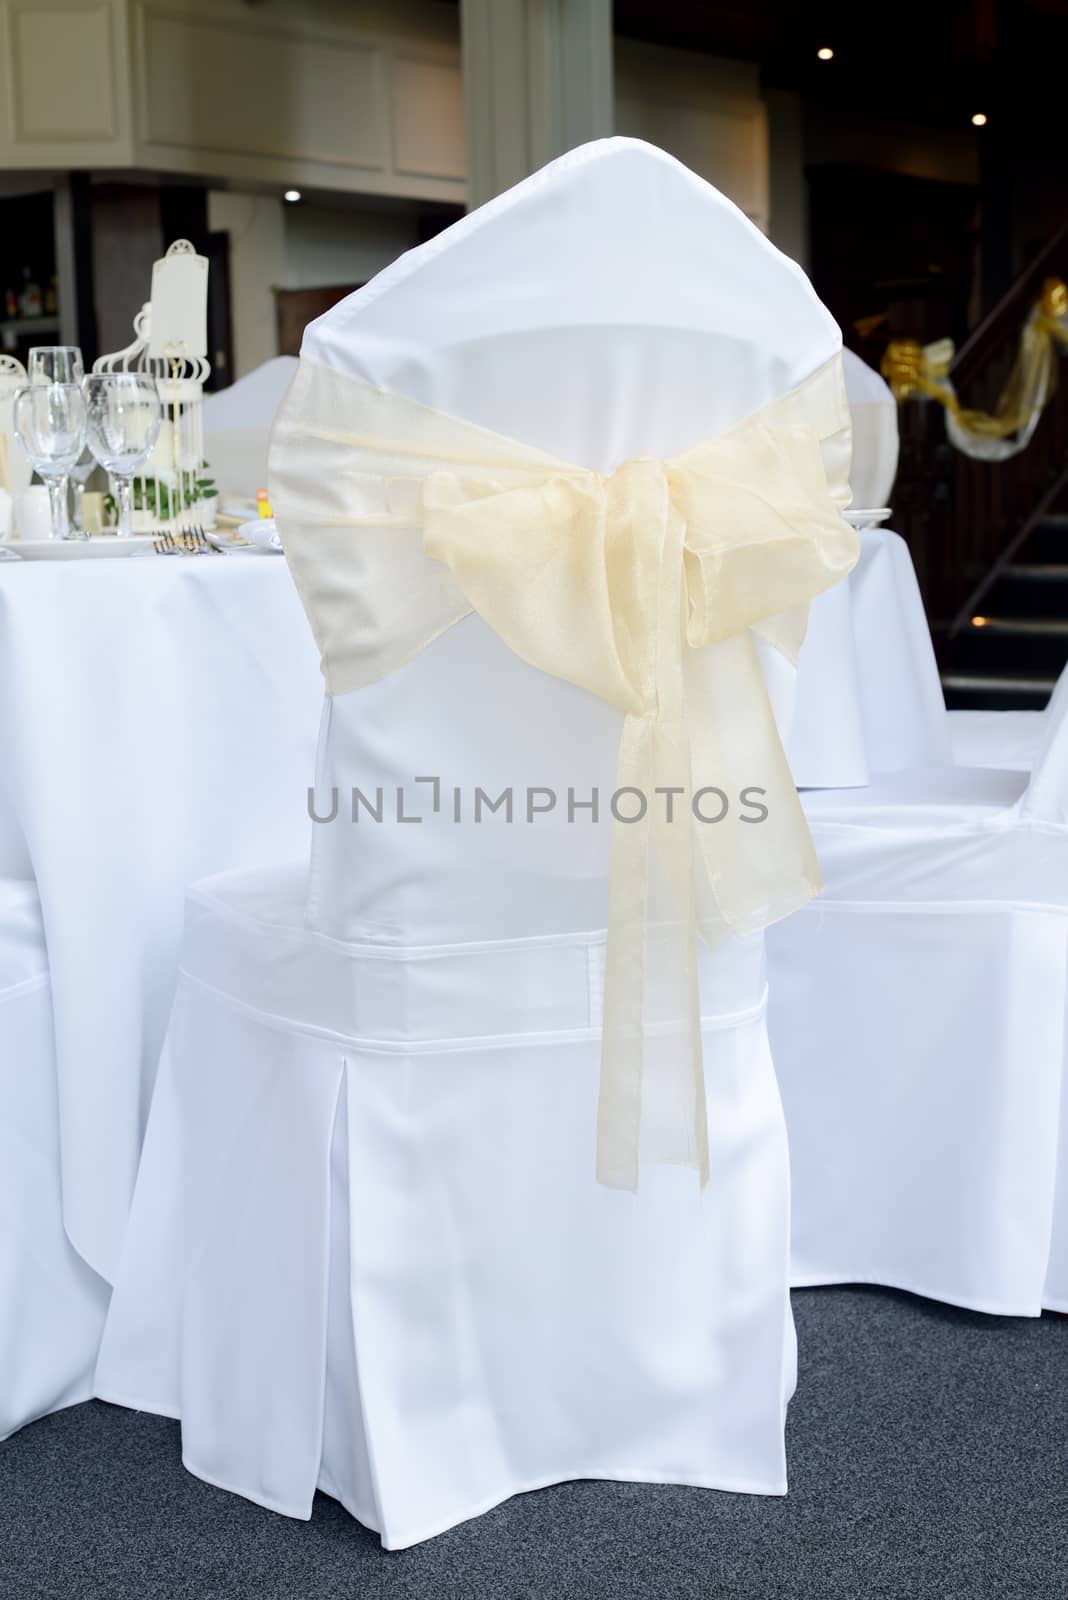 Chair cover at wedding by kmwphotography